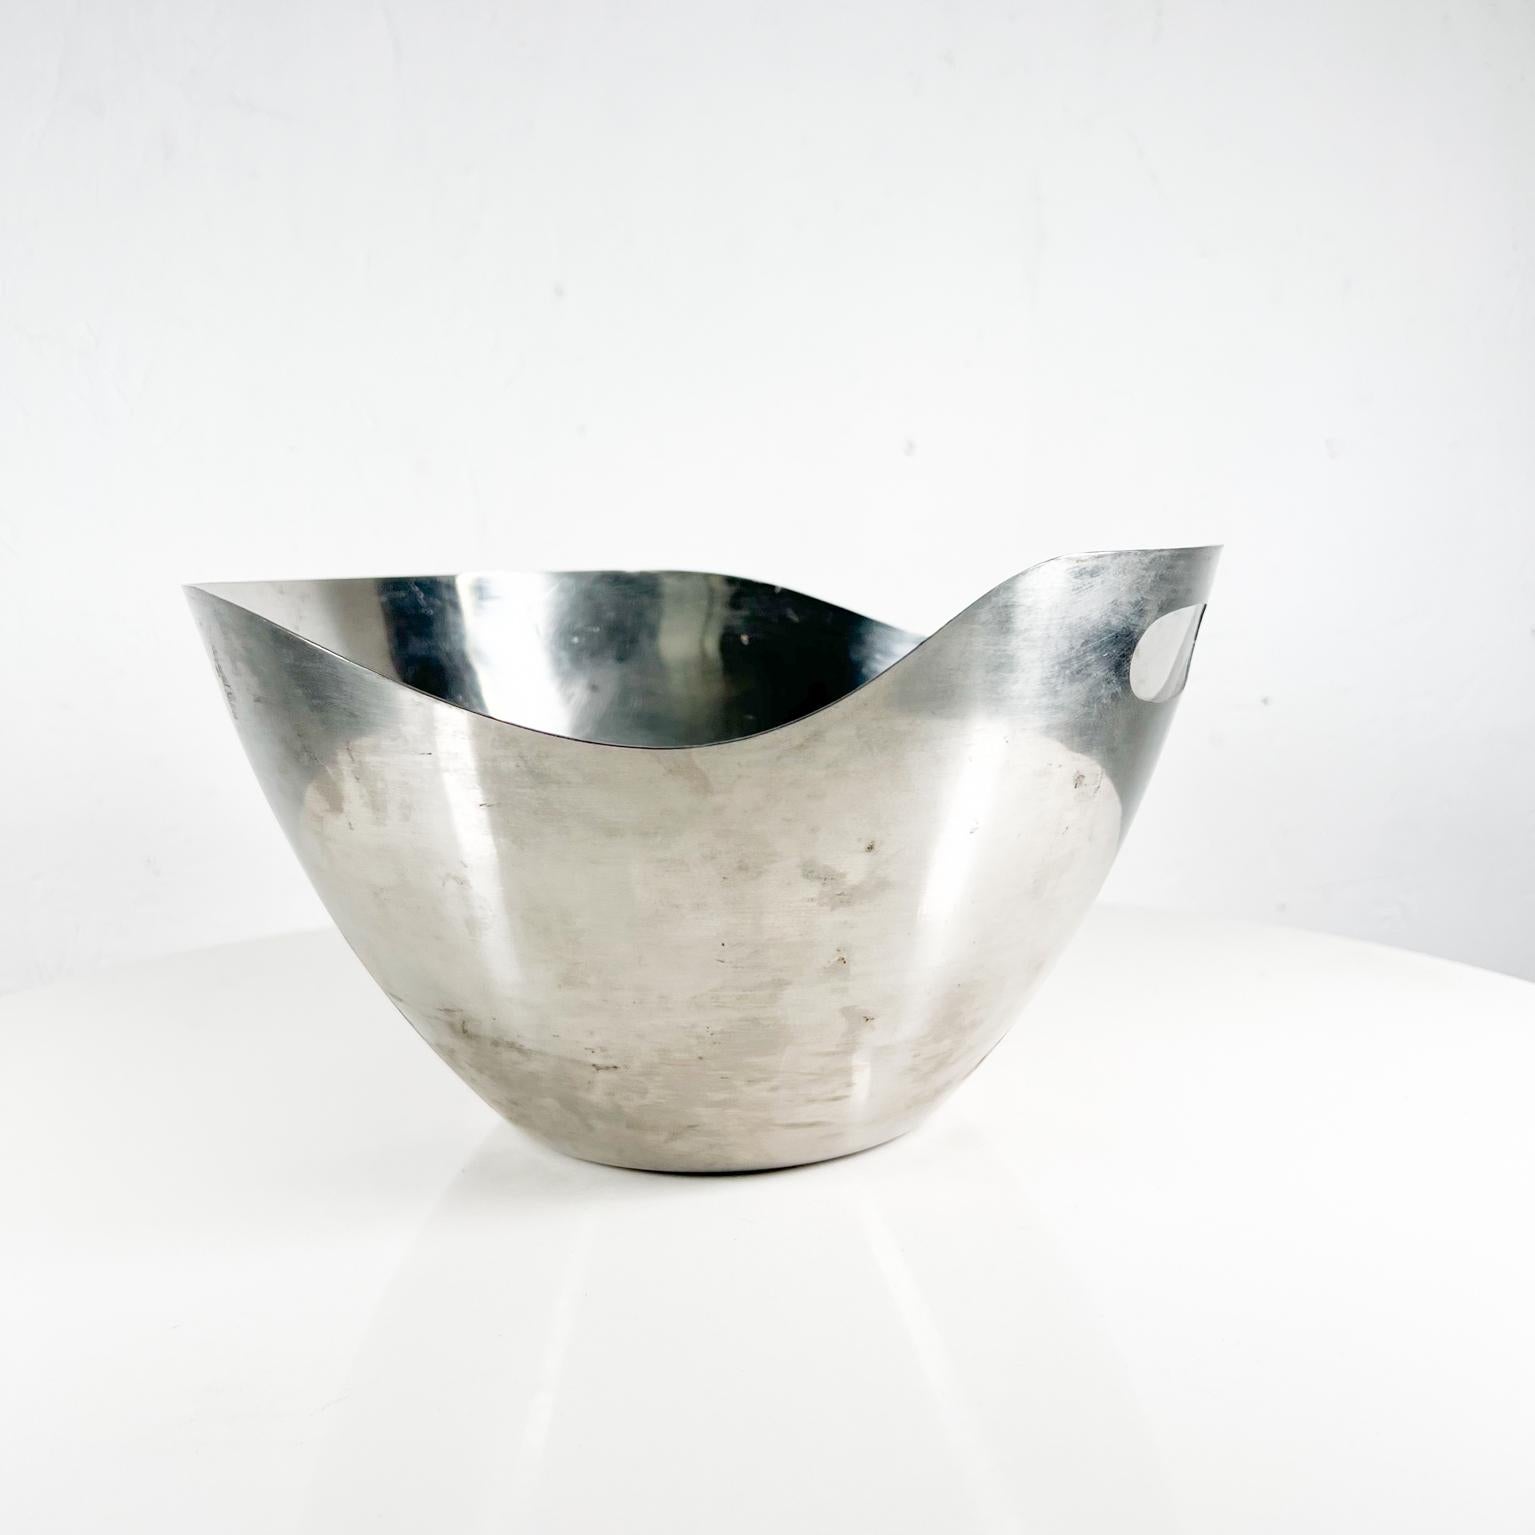 Japanese 1960s Modern Sculptural Stainless-Steel Wave Salad Bowl from Japan